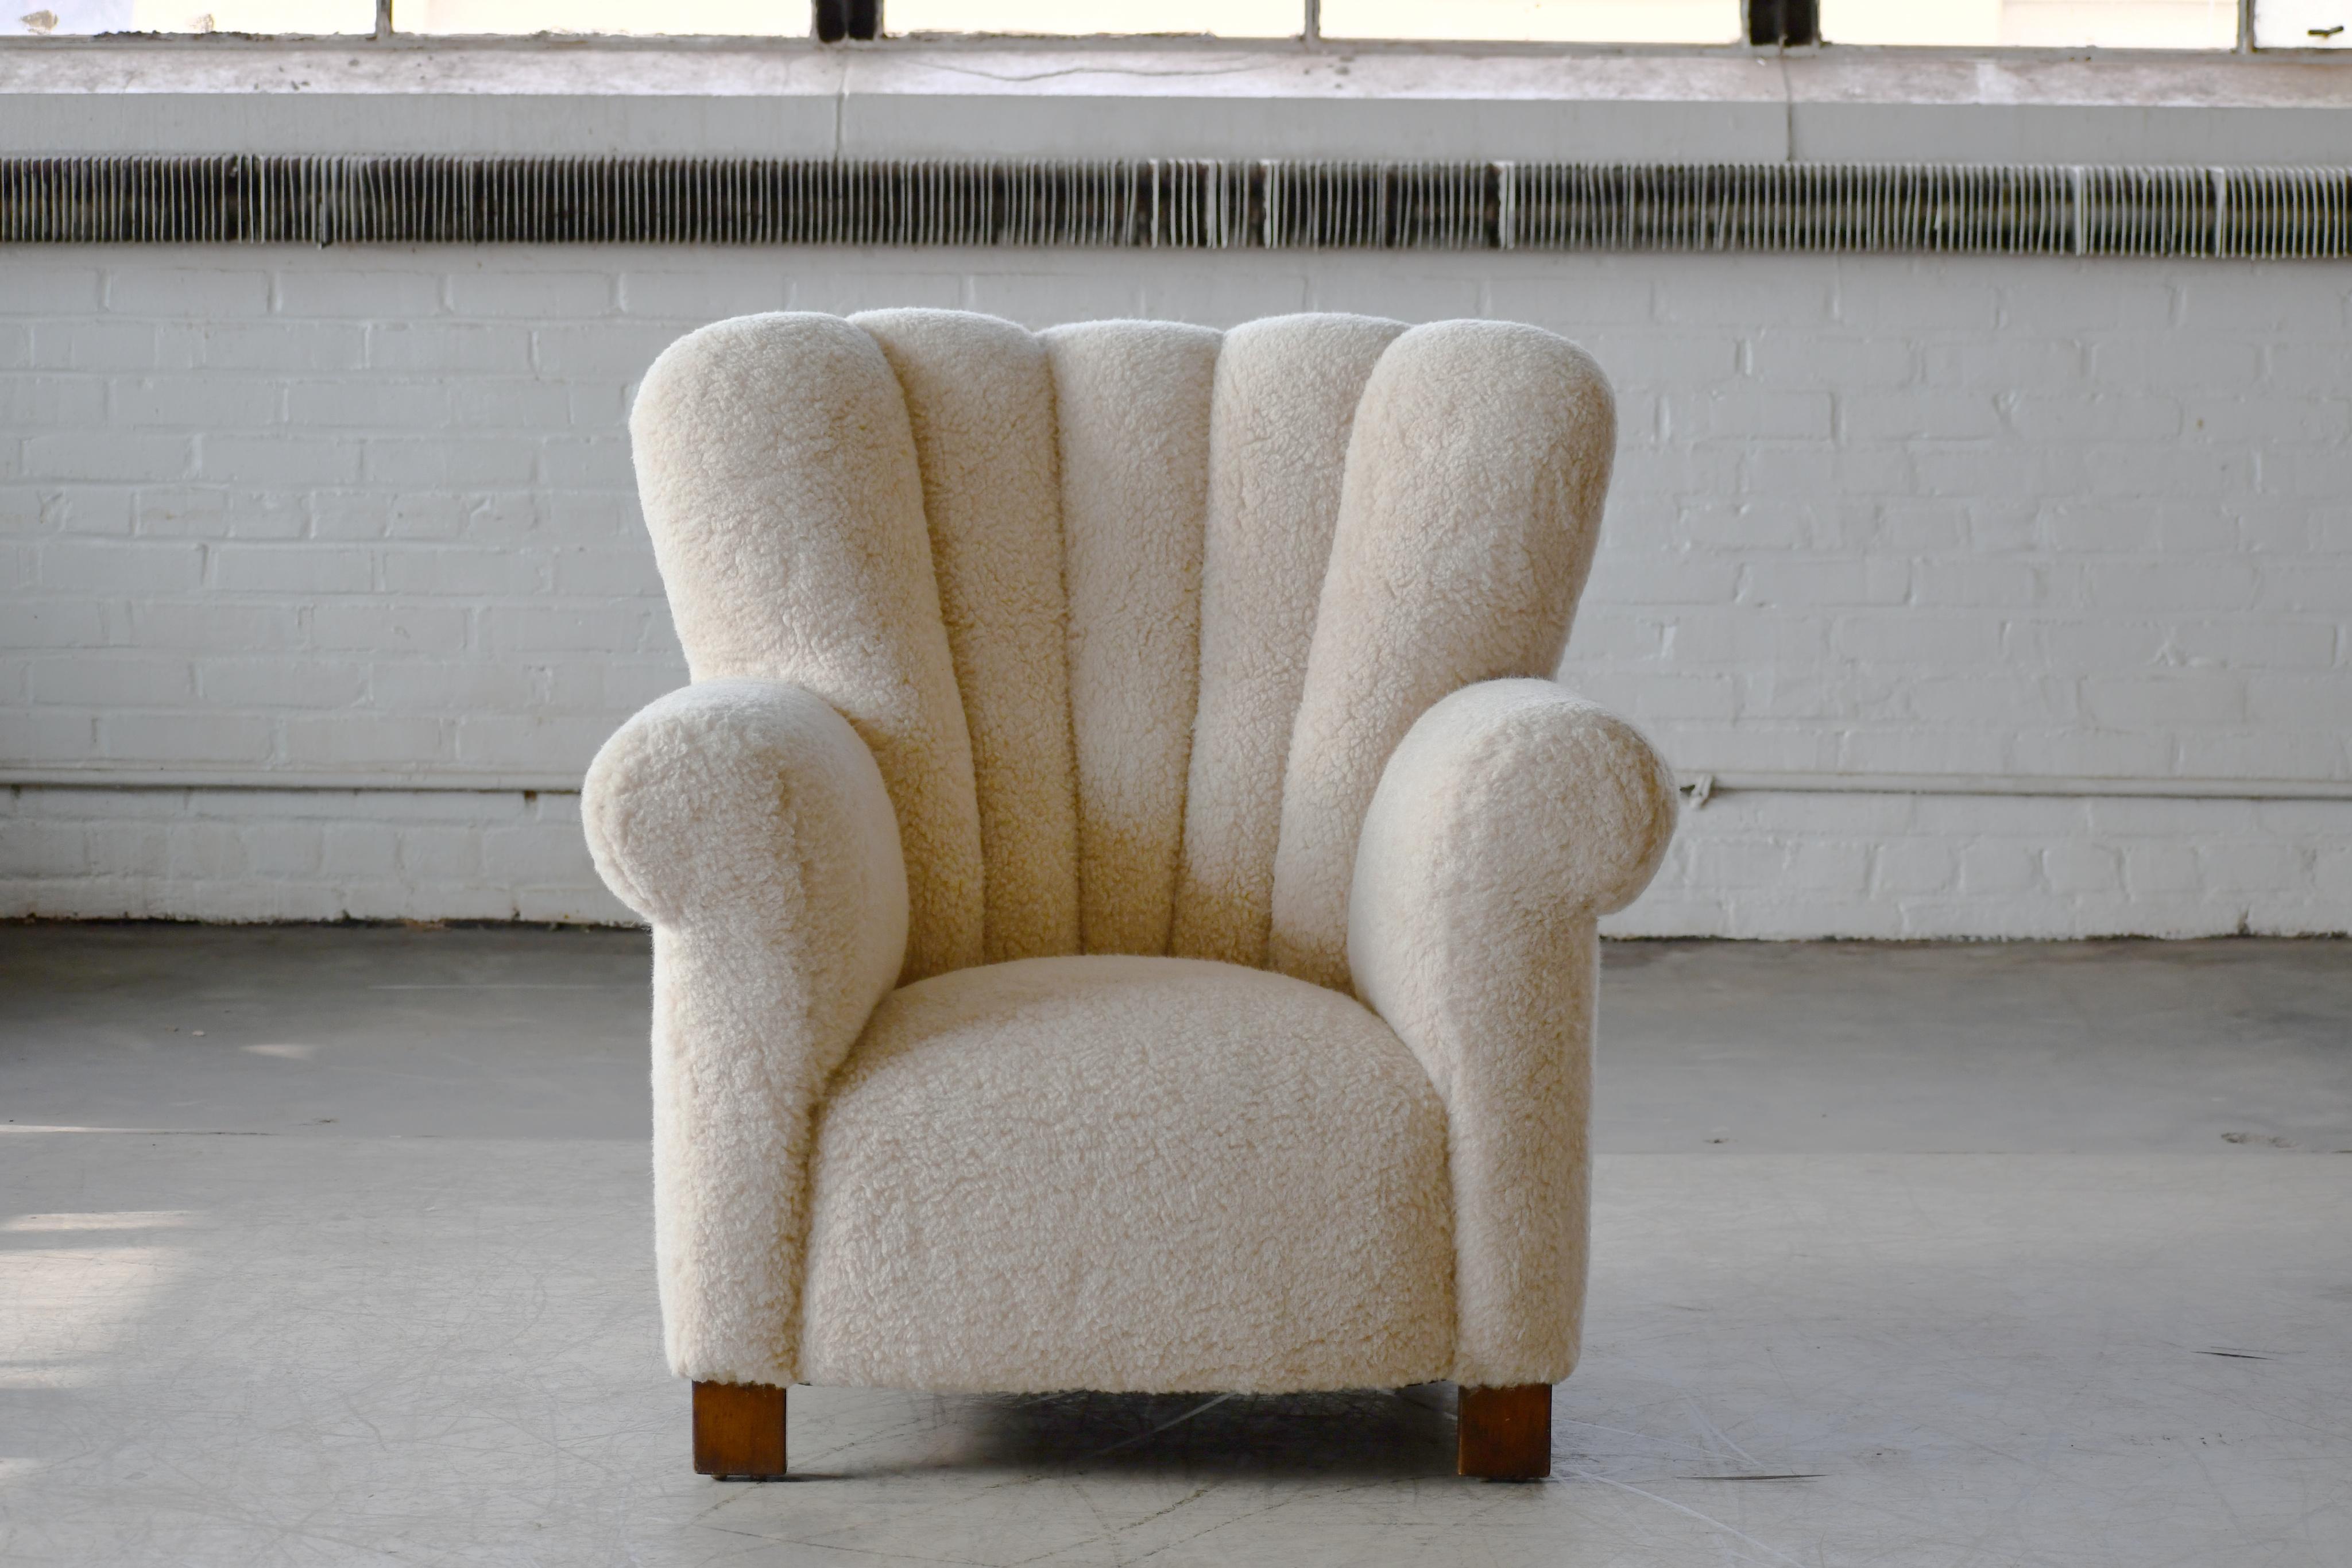 Fritz Hansen attributed 1940s Danish highback lounge chair in Lambswool.

Sublime highback lounge chair with channeled back made in Denmark in the late 1930s or early 1940s. This model chair is seen from time to time in the Danish market and is